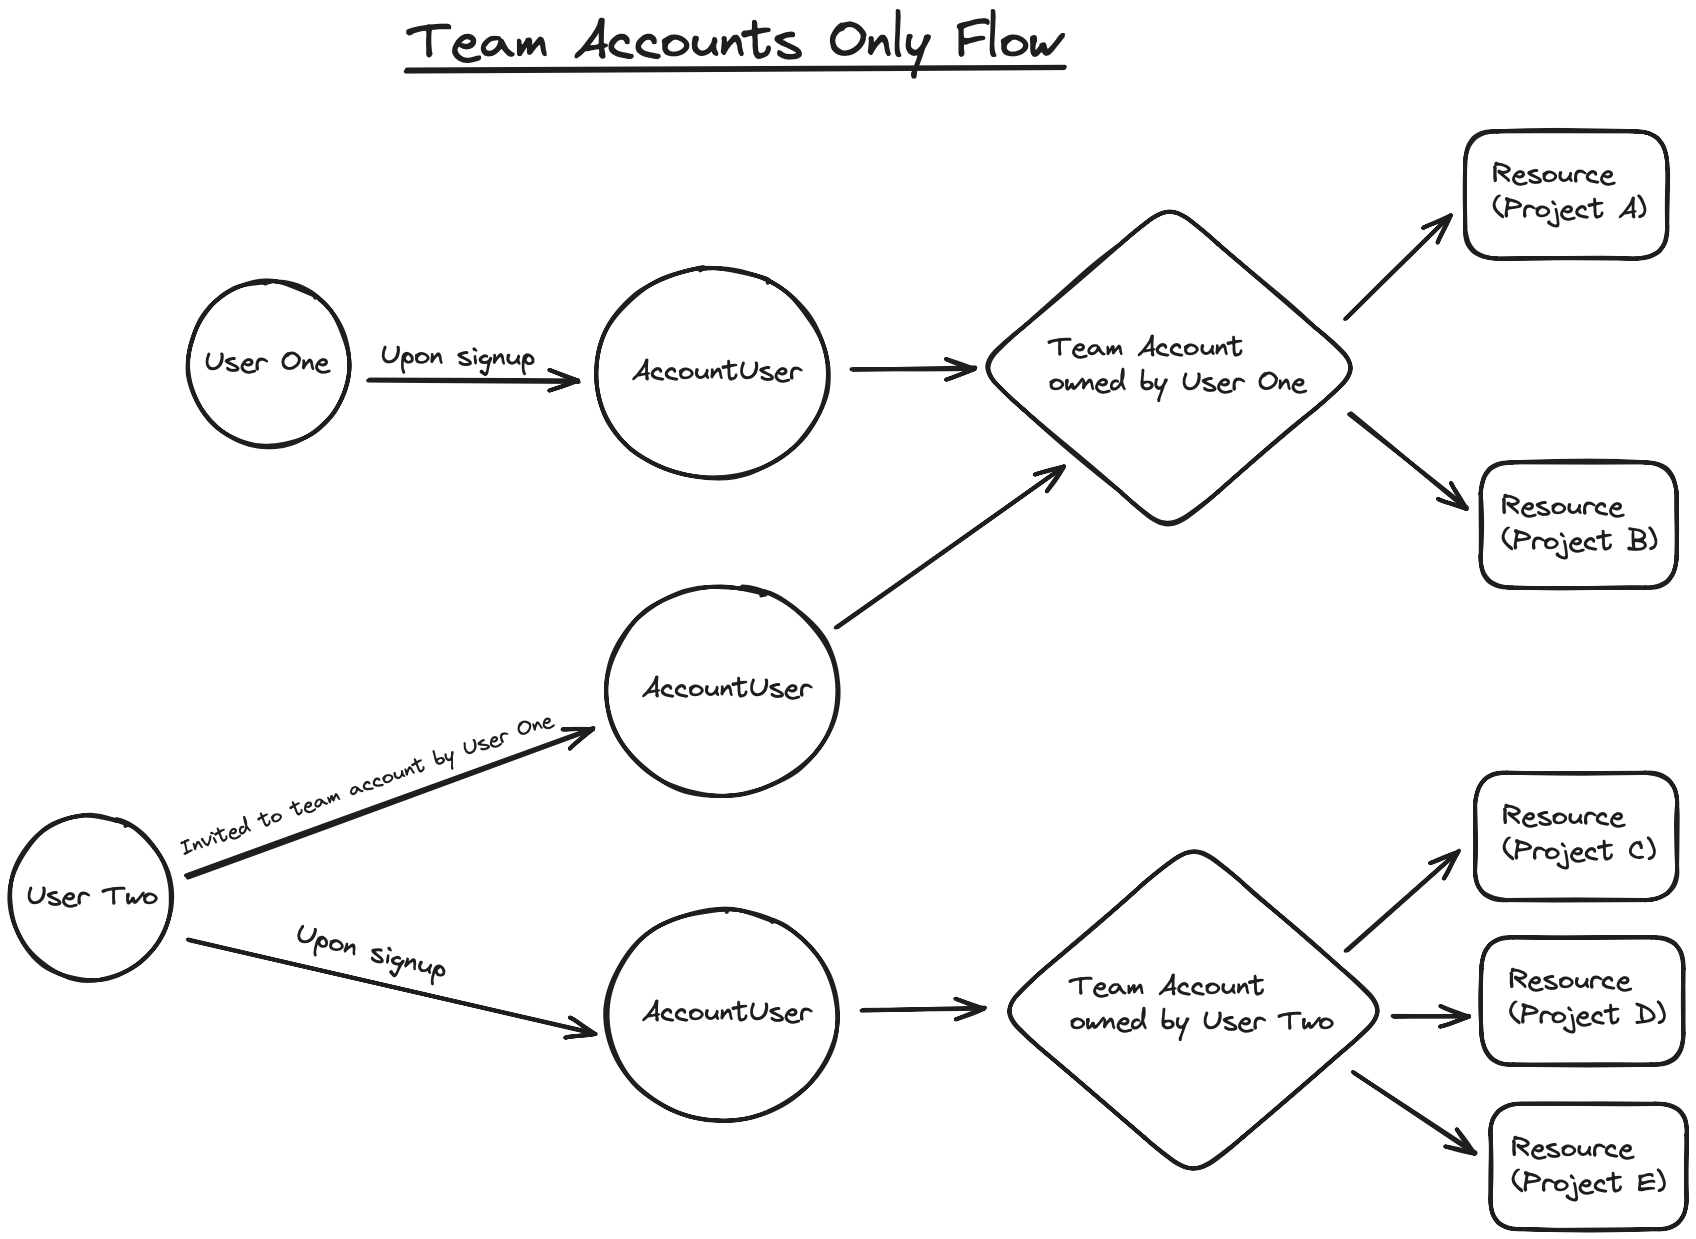 Diagram of team account only flow in Jumpstart Pro